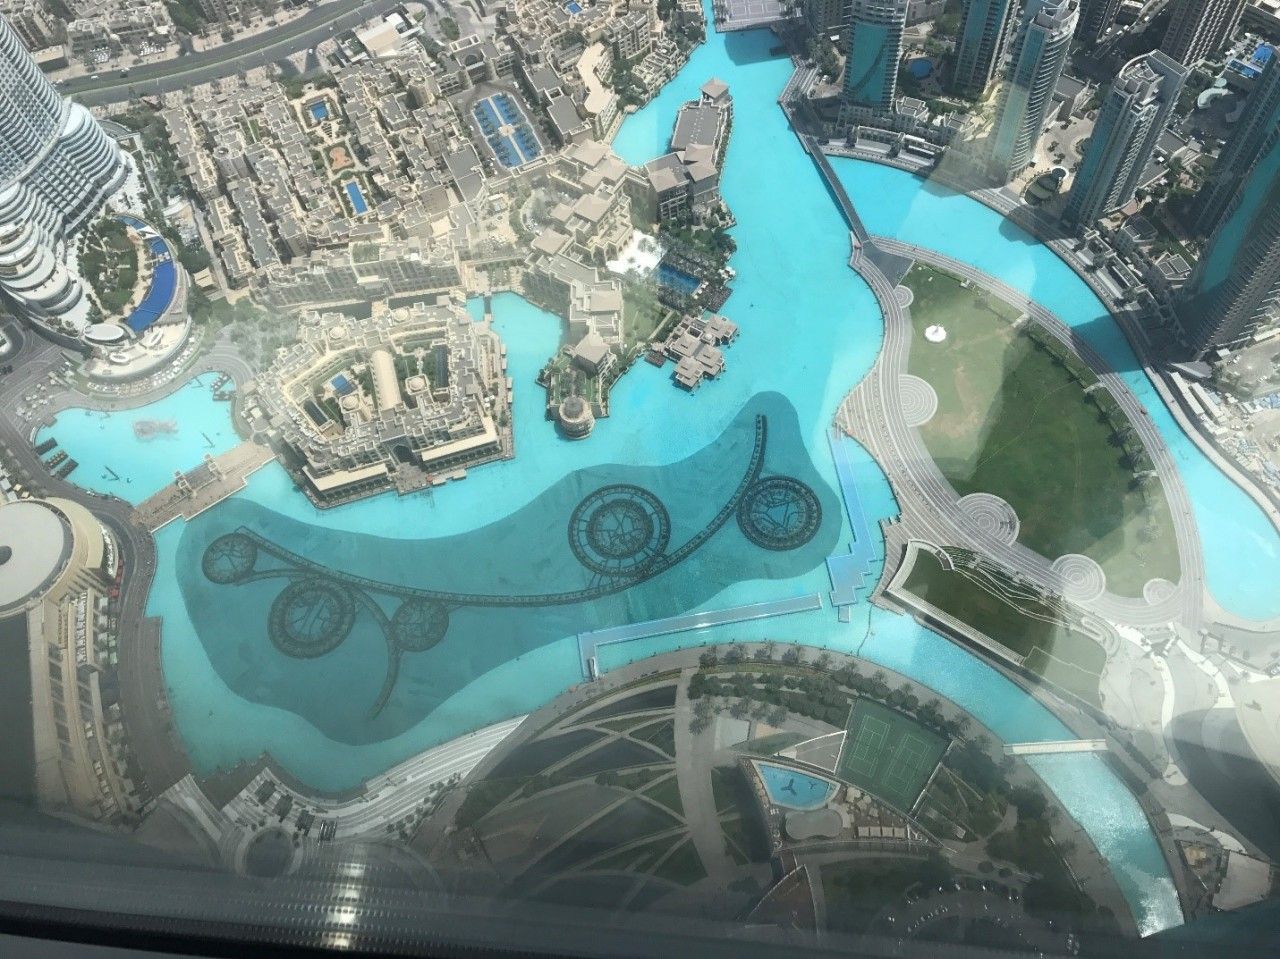 Some hydraulics from Khalifa Tower 125th floor! A water show took place here which I got to see from this angle.